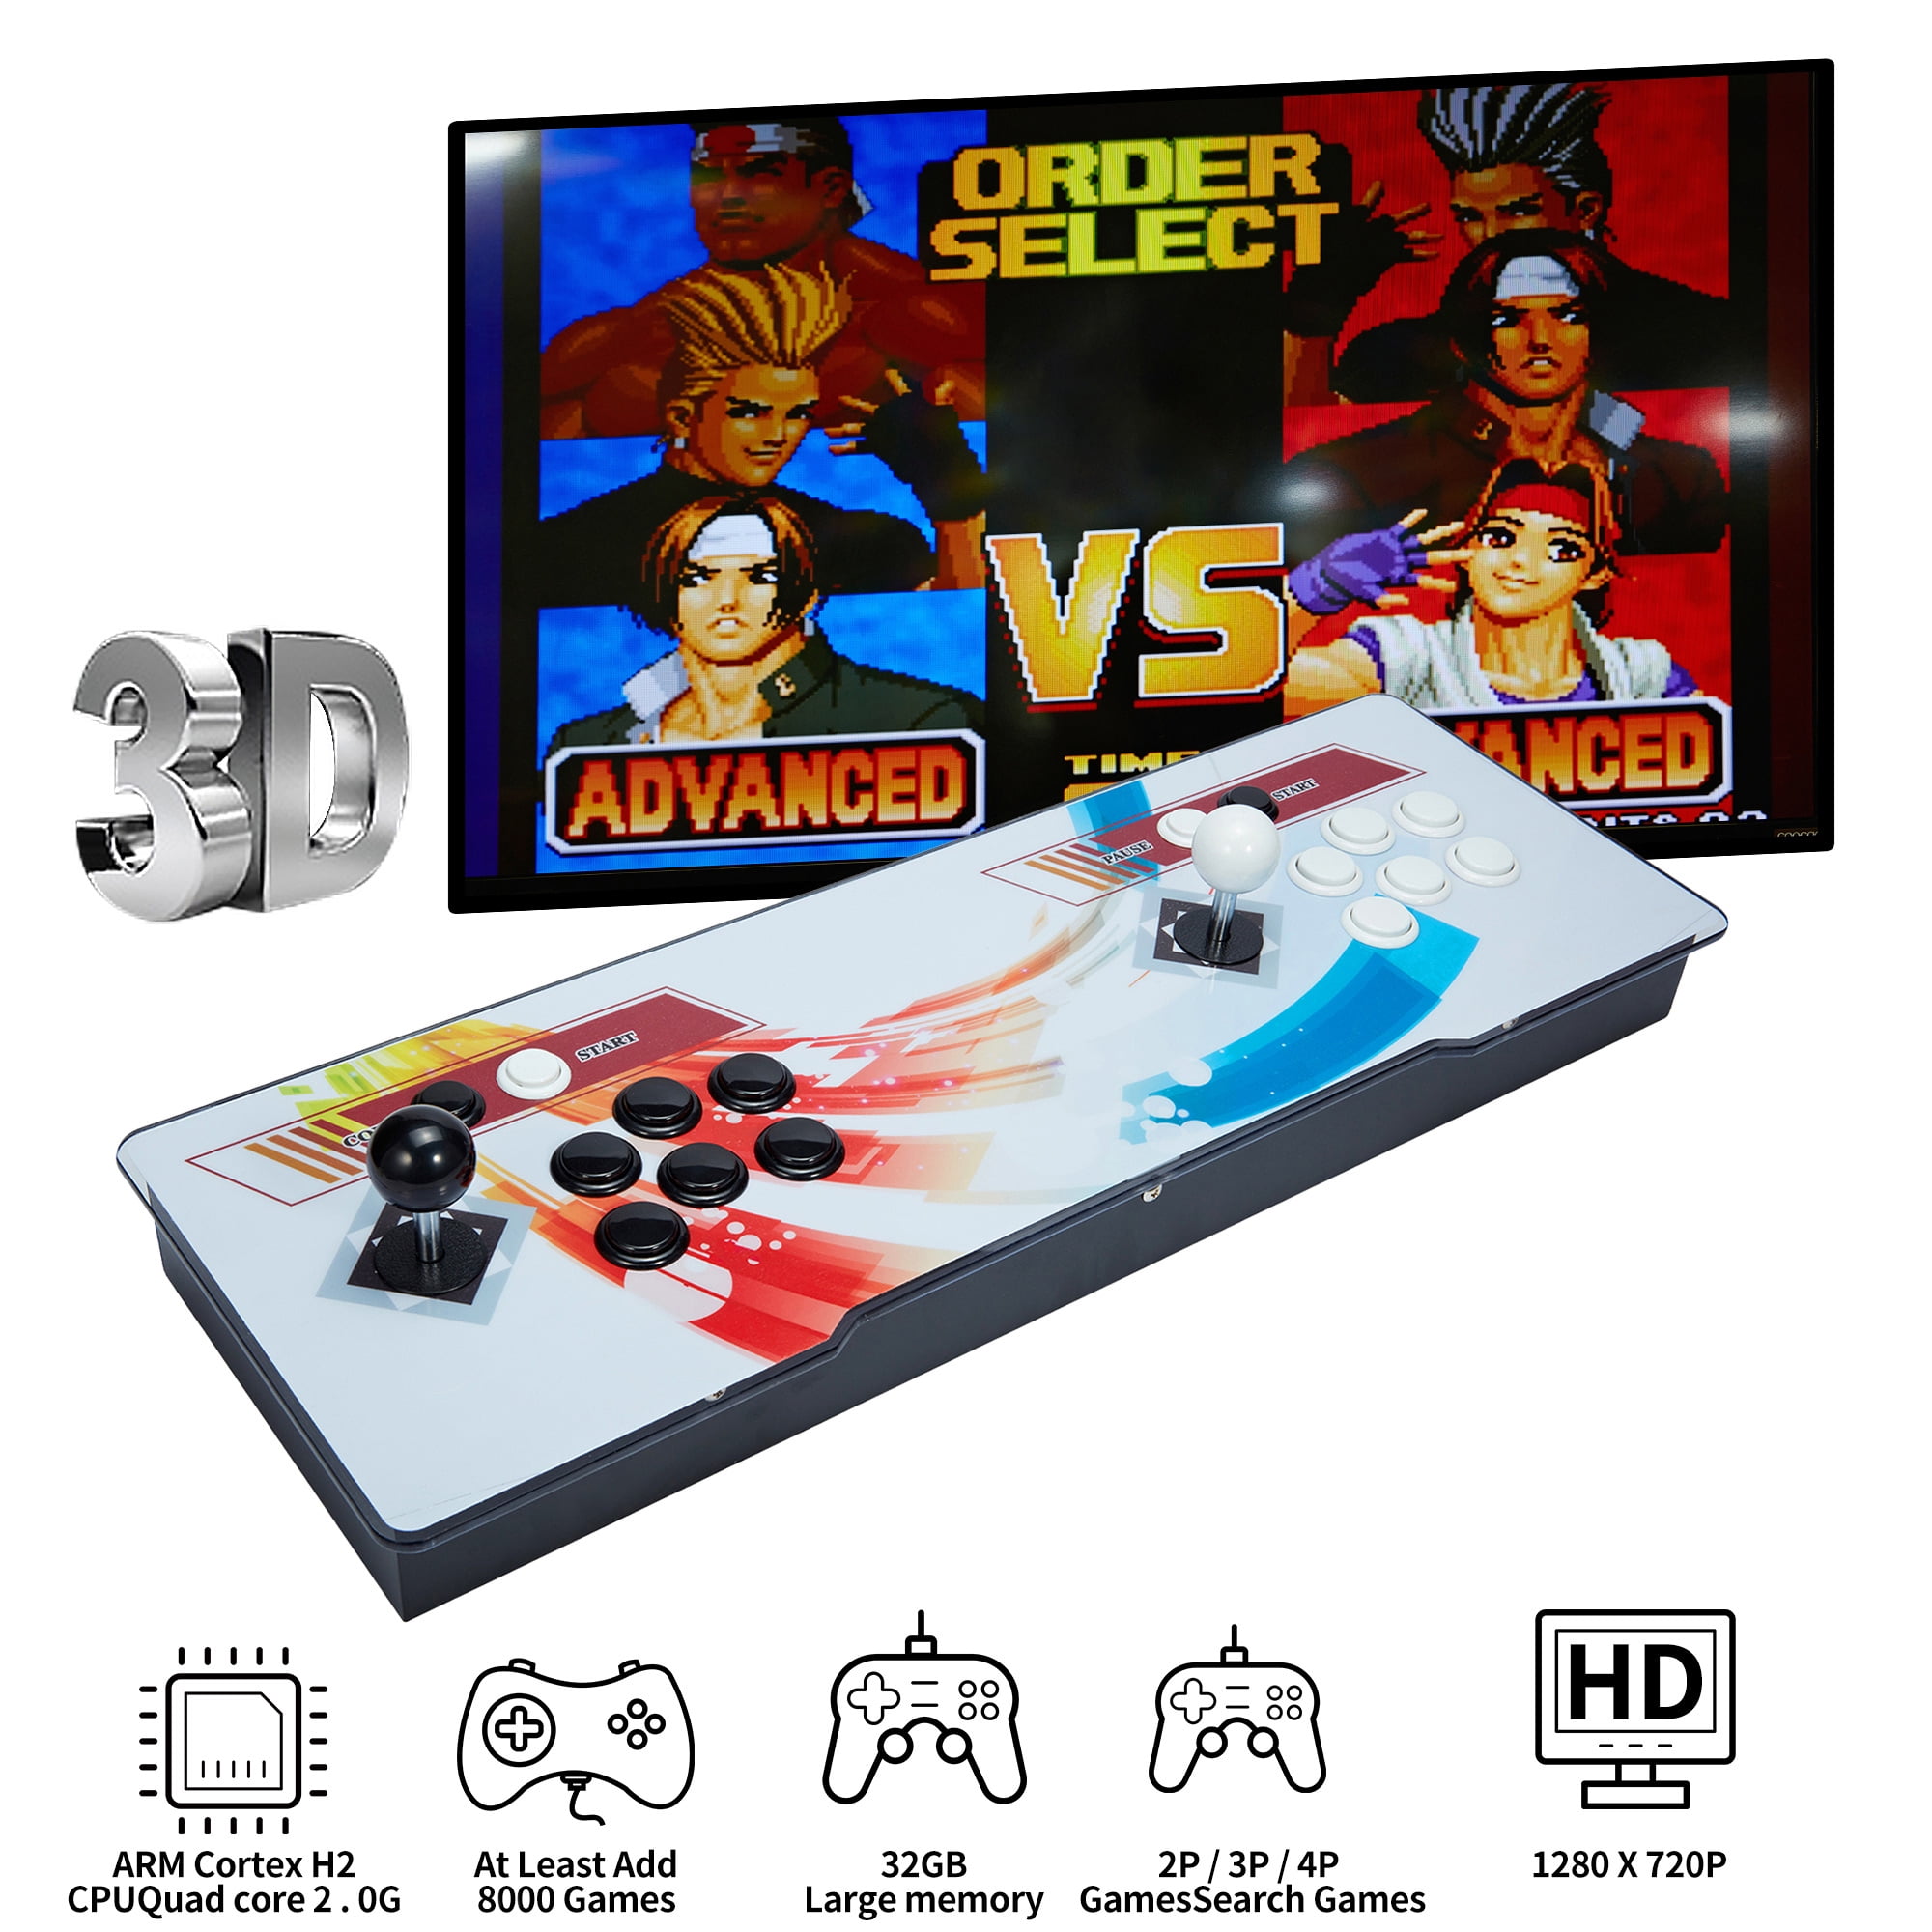  Uiexer 3D Pandora's Box with 9800 Classic Games, Arcade Game  Console Retro Game Machine Support PC/Projector/TV, 1280 x 720 Full HD,  Search/Hide/Save/Load/Pause Games, 4 Players Online Game : Toys & Games